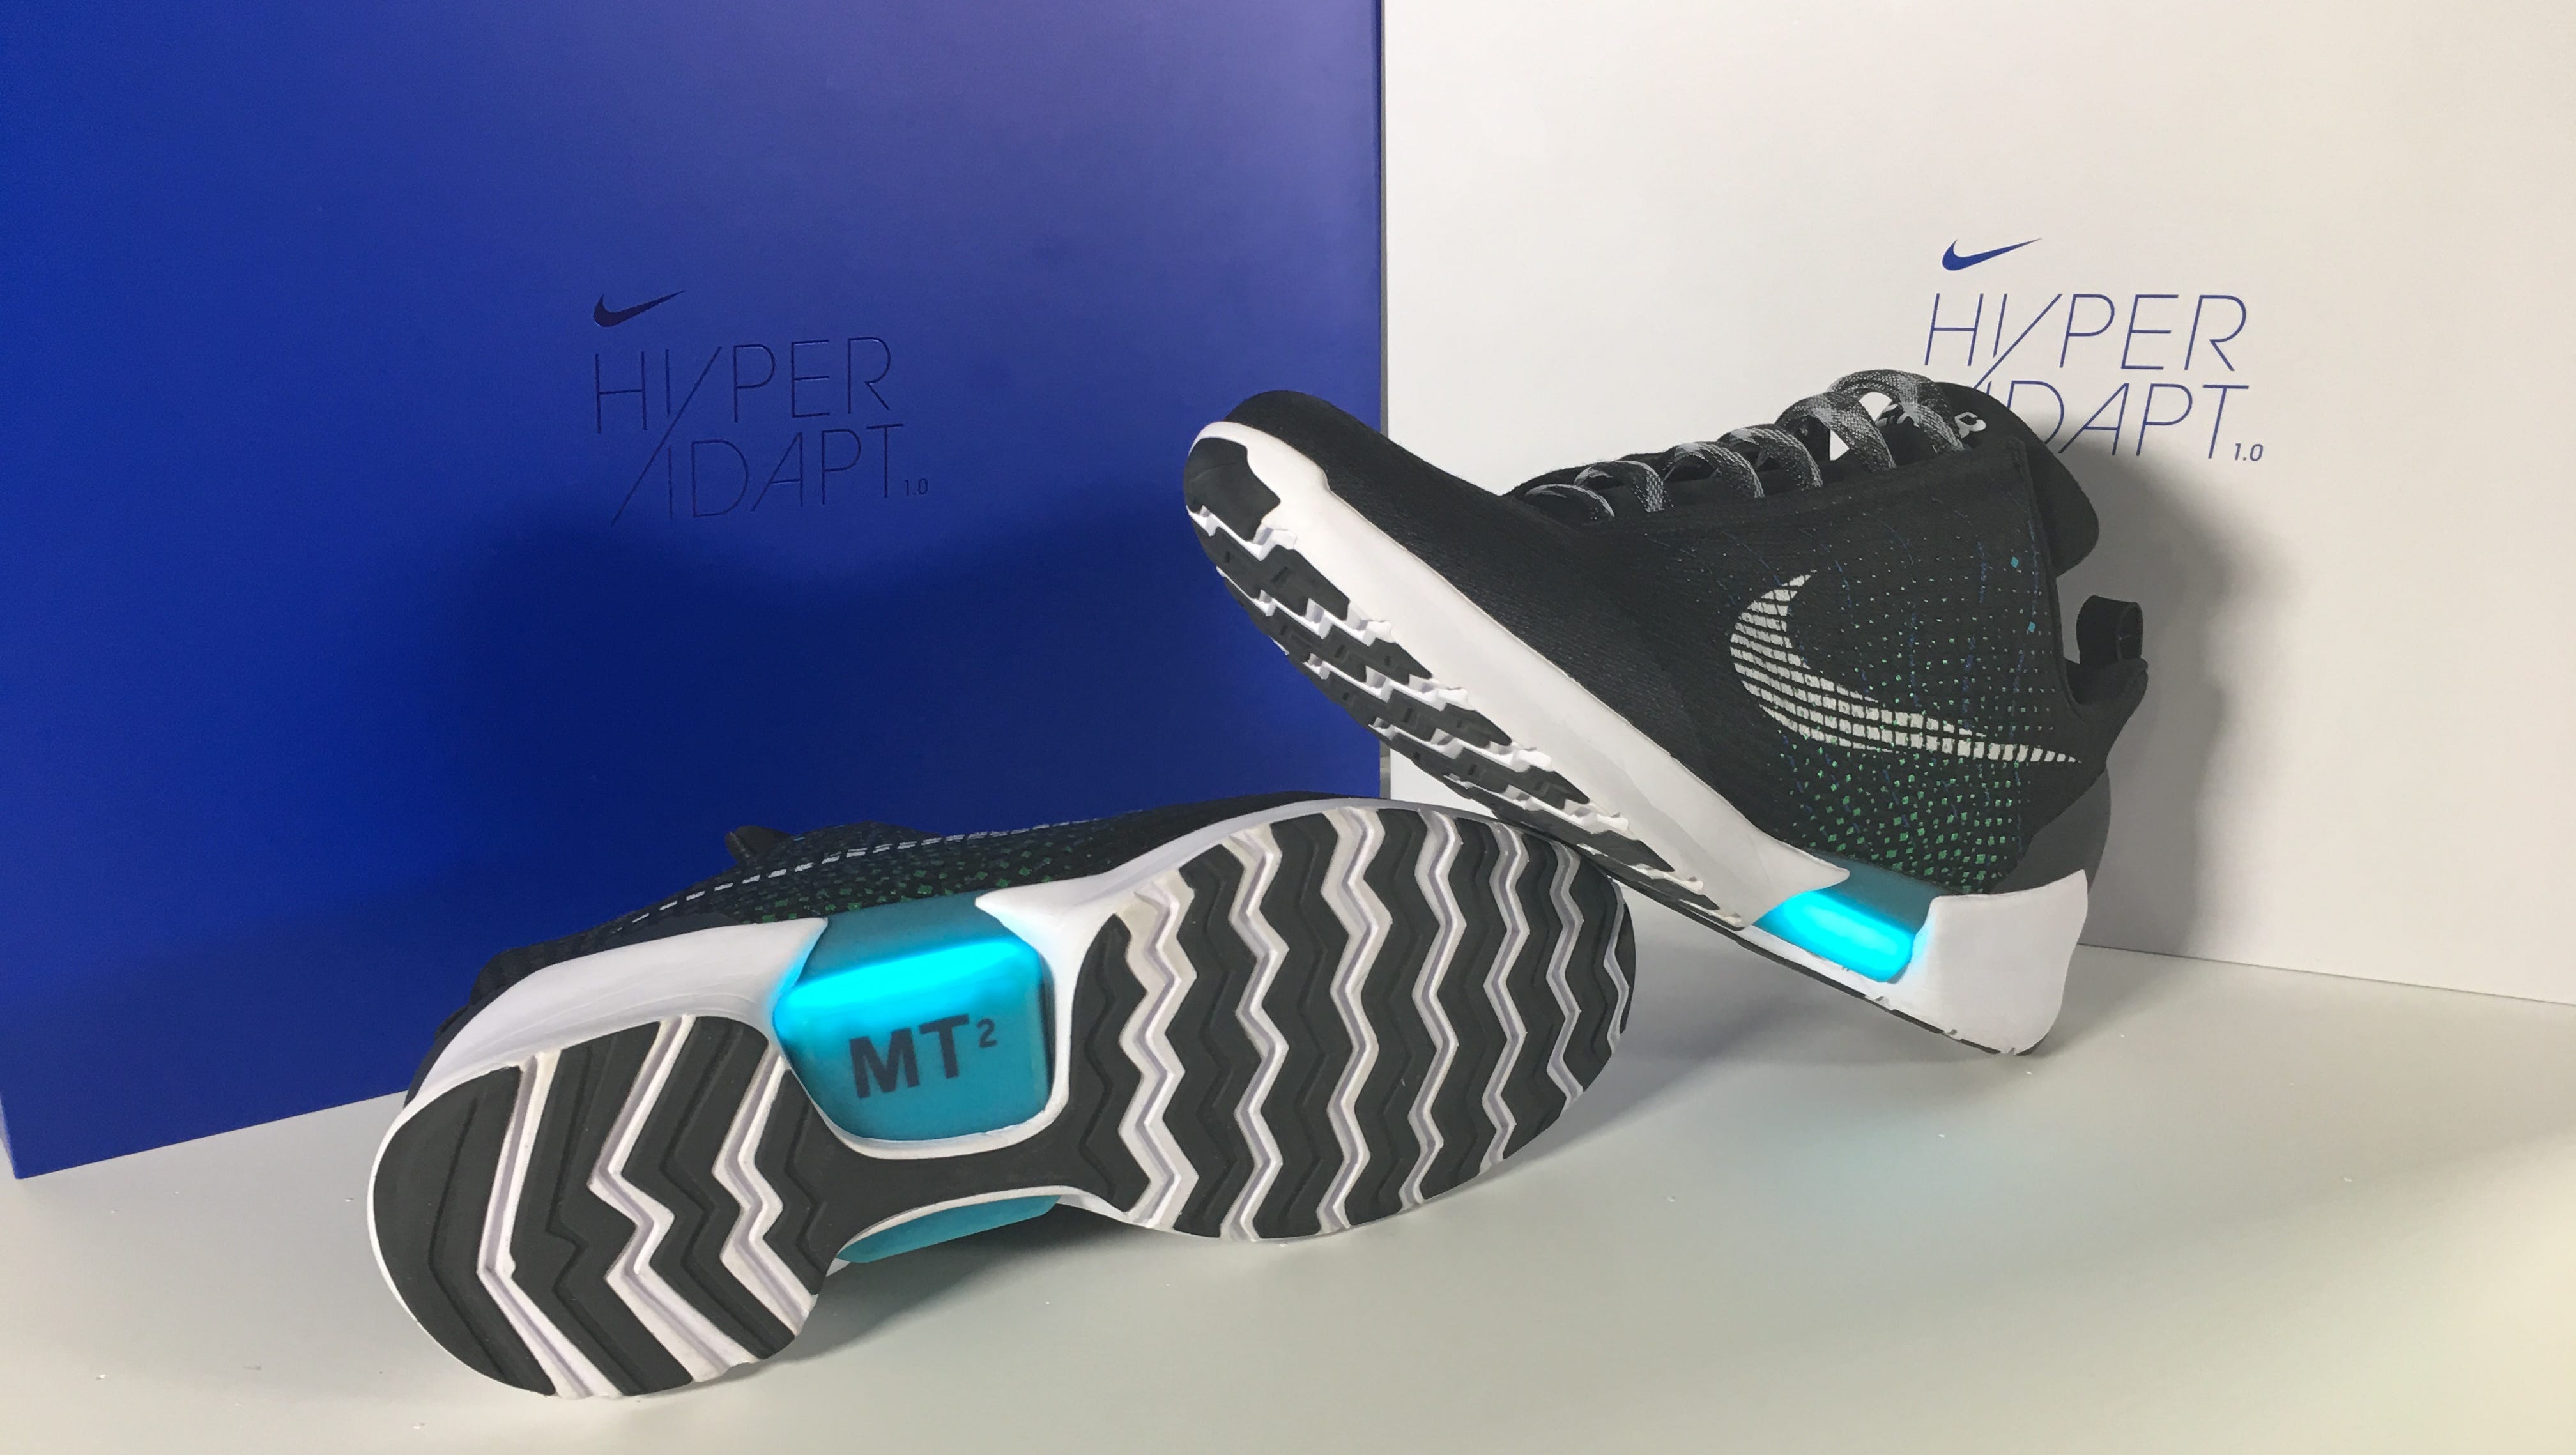 Review: Nike's self-lacing shoes cool, but